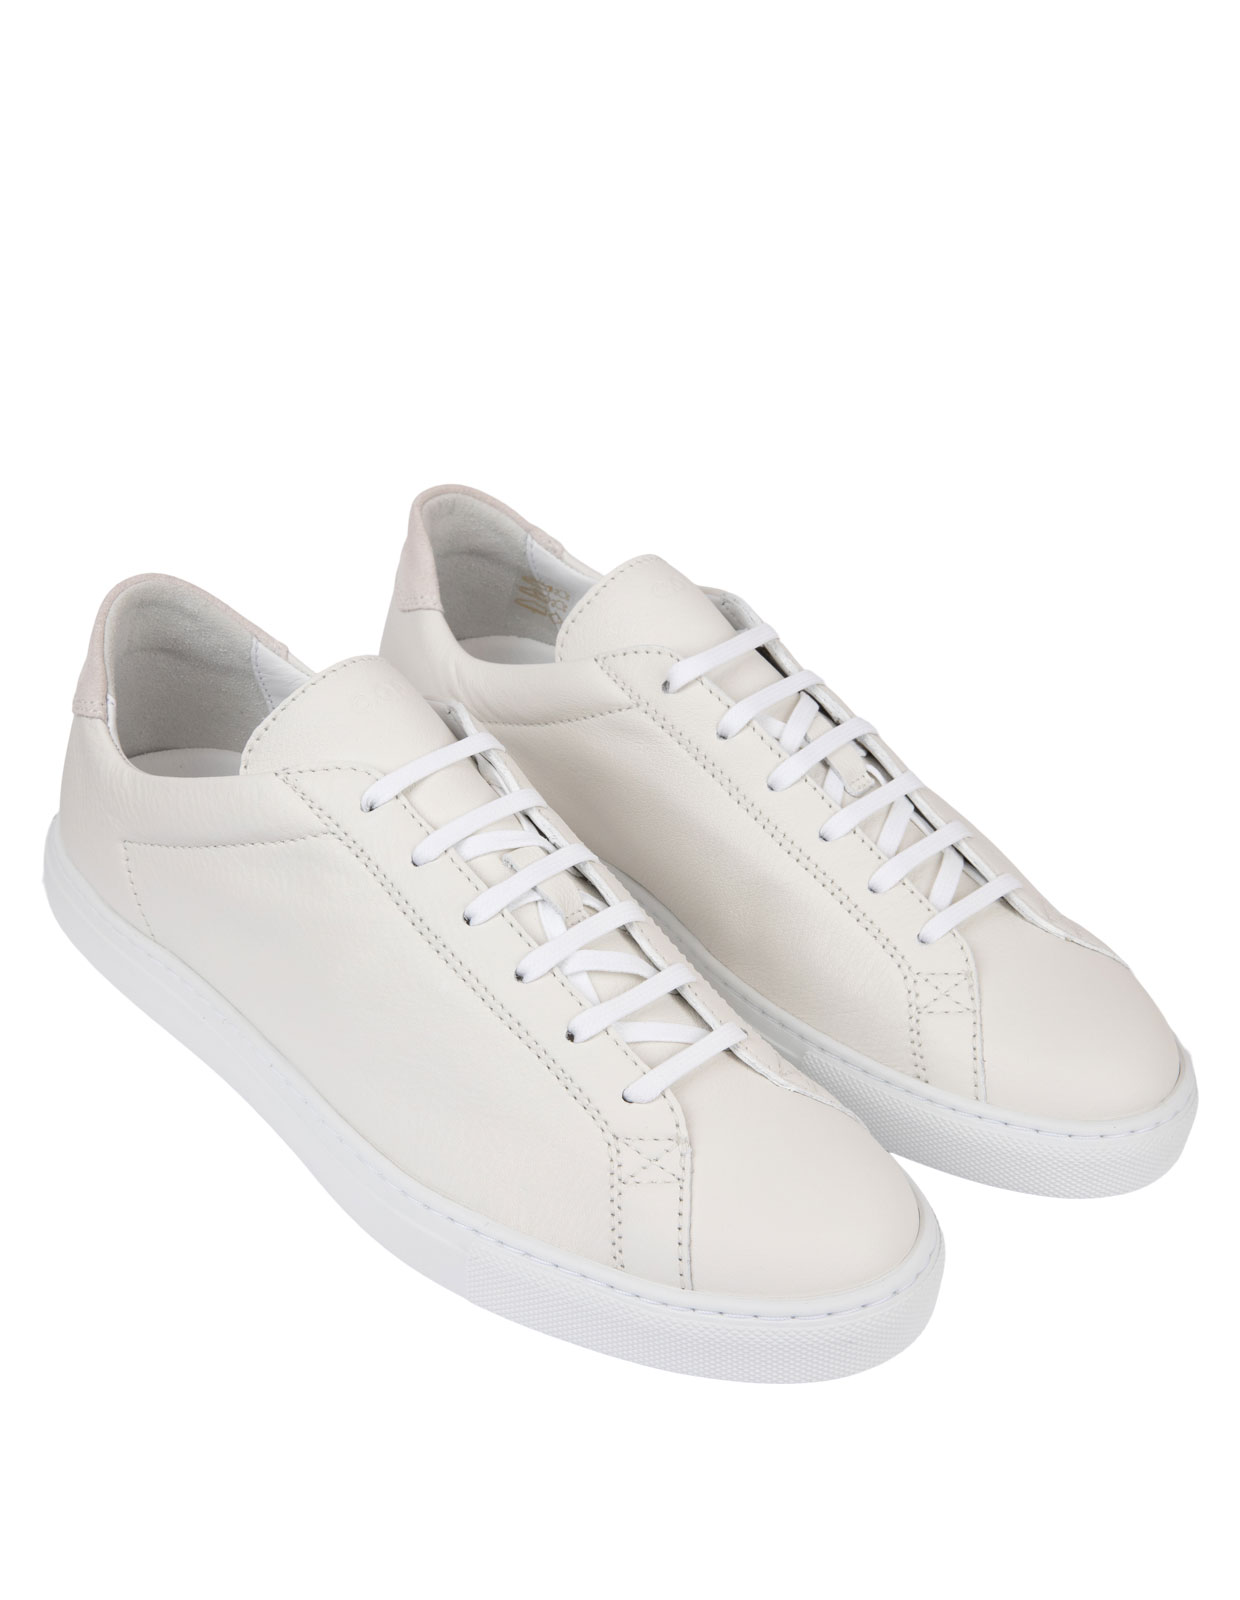 Racquet Unlined Leather Sneaker White Stl 42